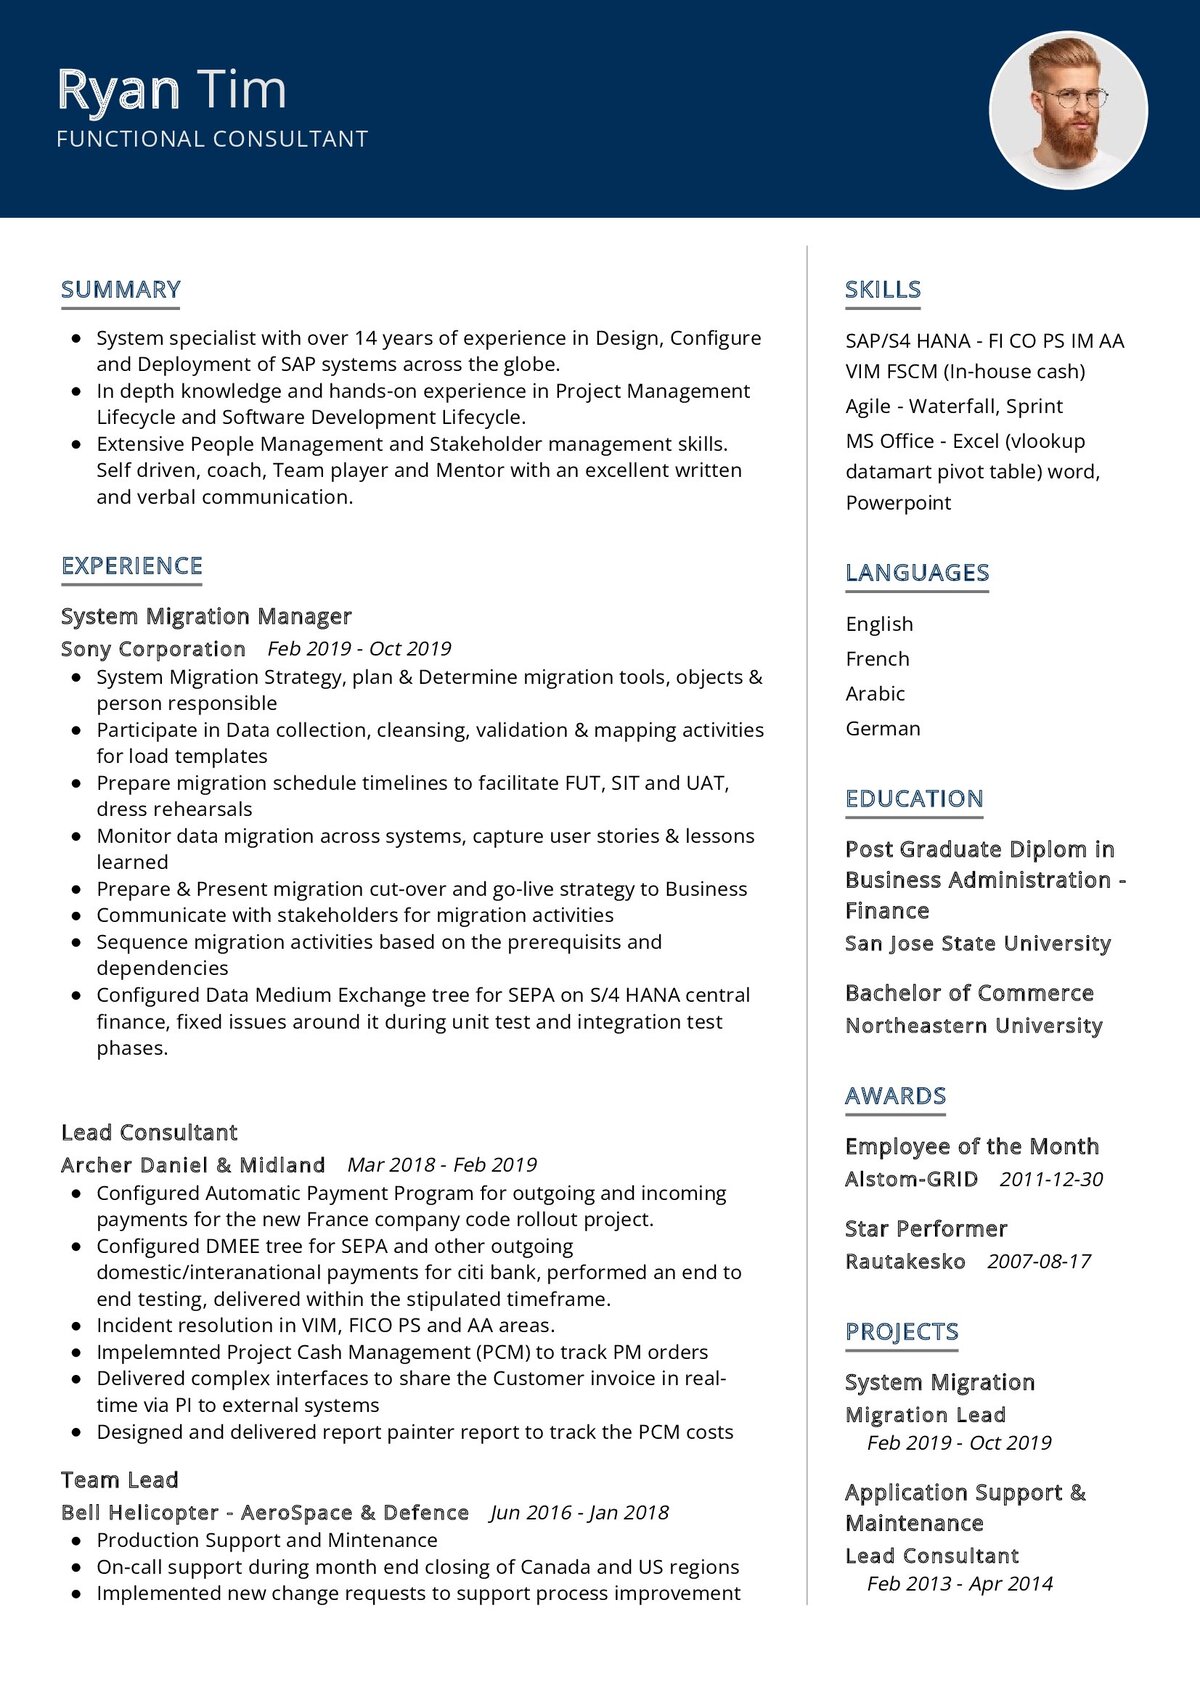 resume format for erp functional consultant